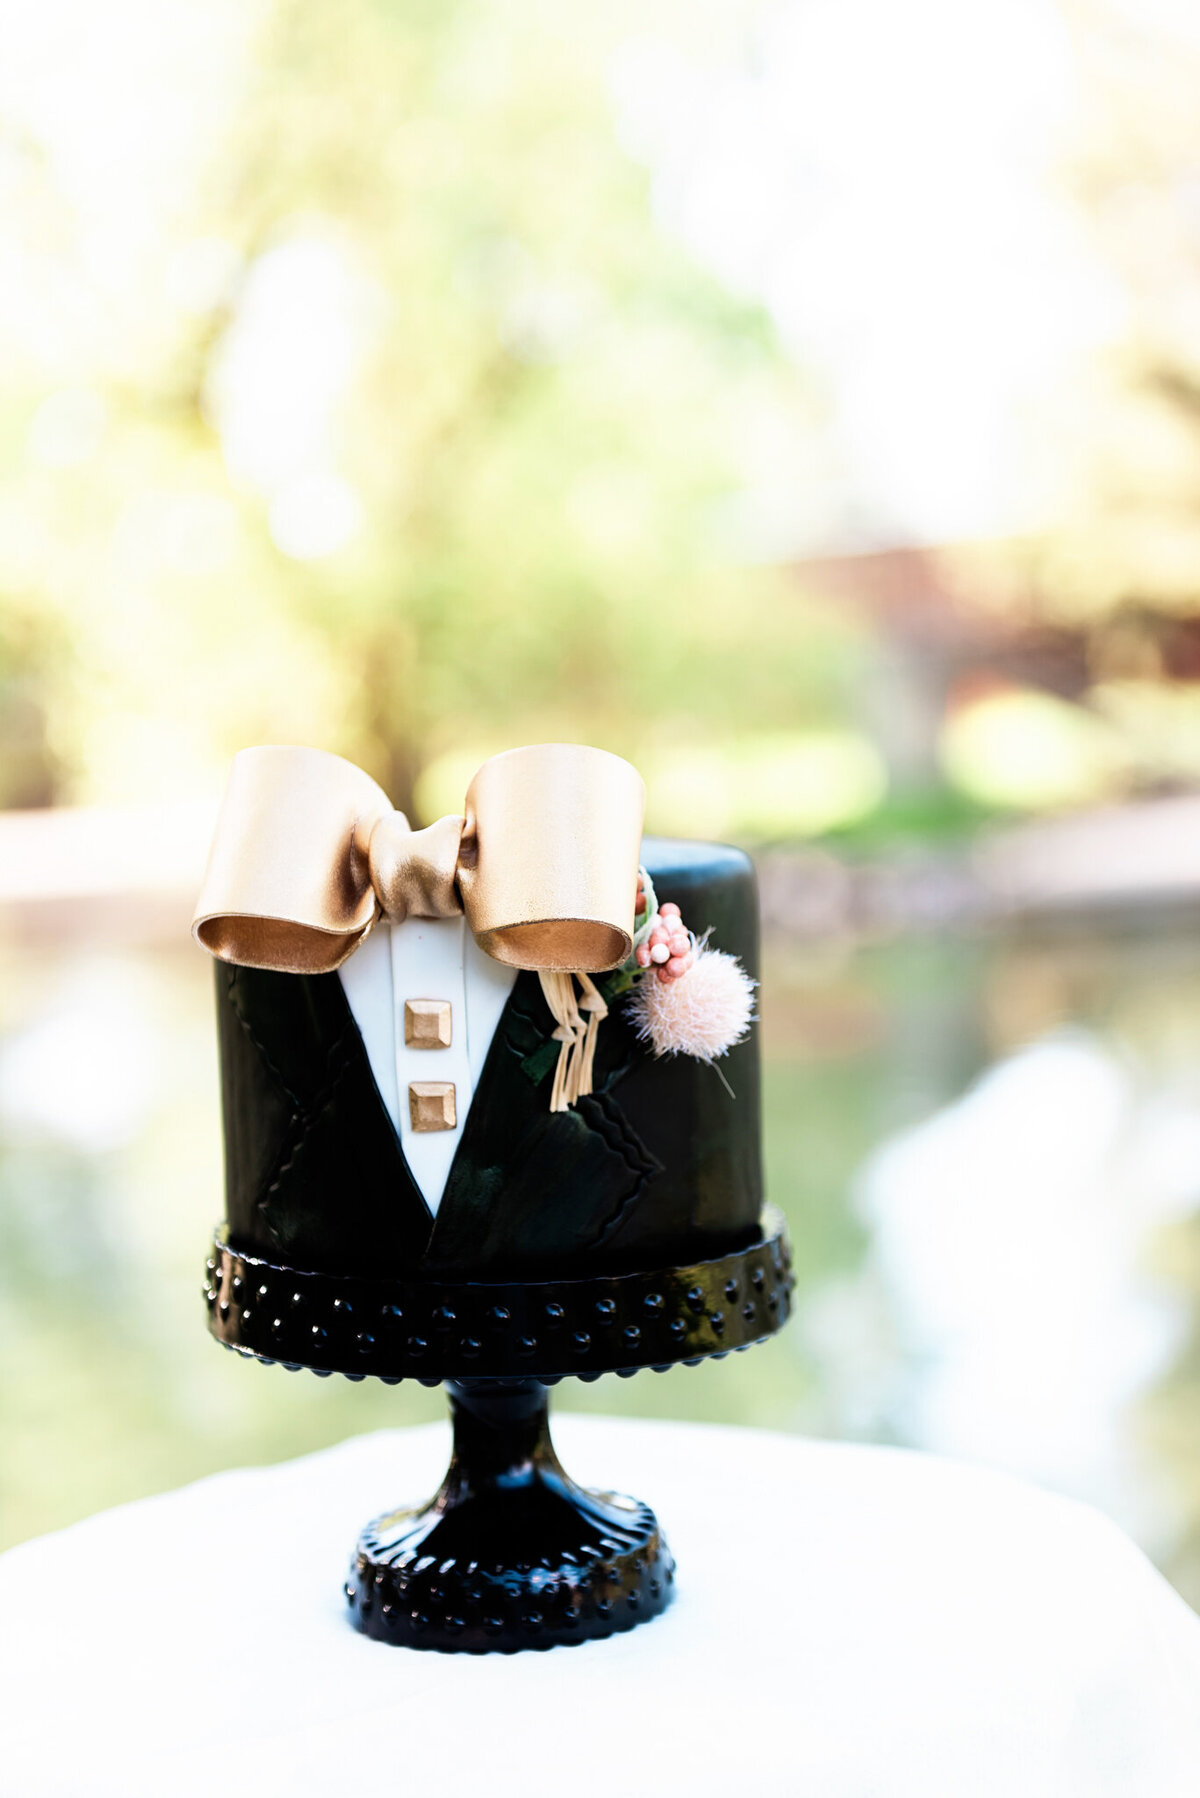 Fun and trendy tuxedo groom's wedding cake, with gold details, created by Black Dog Bakery, creative & eclectic cakes & desserts in Calgary, Alberta, featured on the Brontë Bride Vendor Guide.